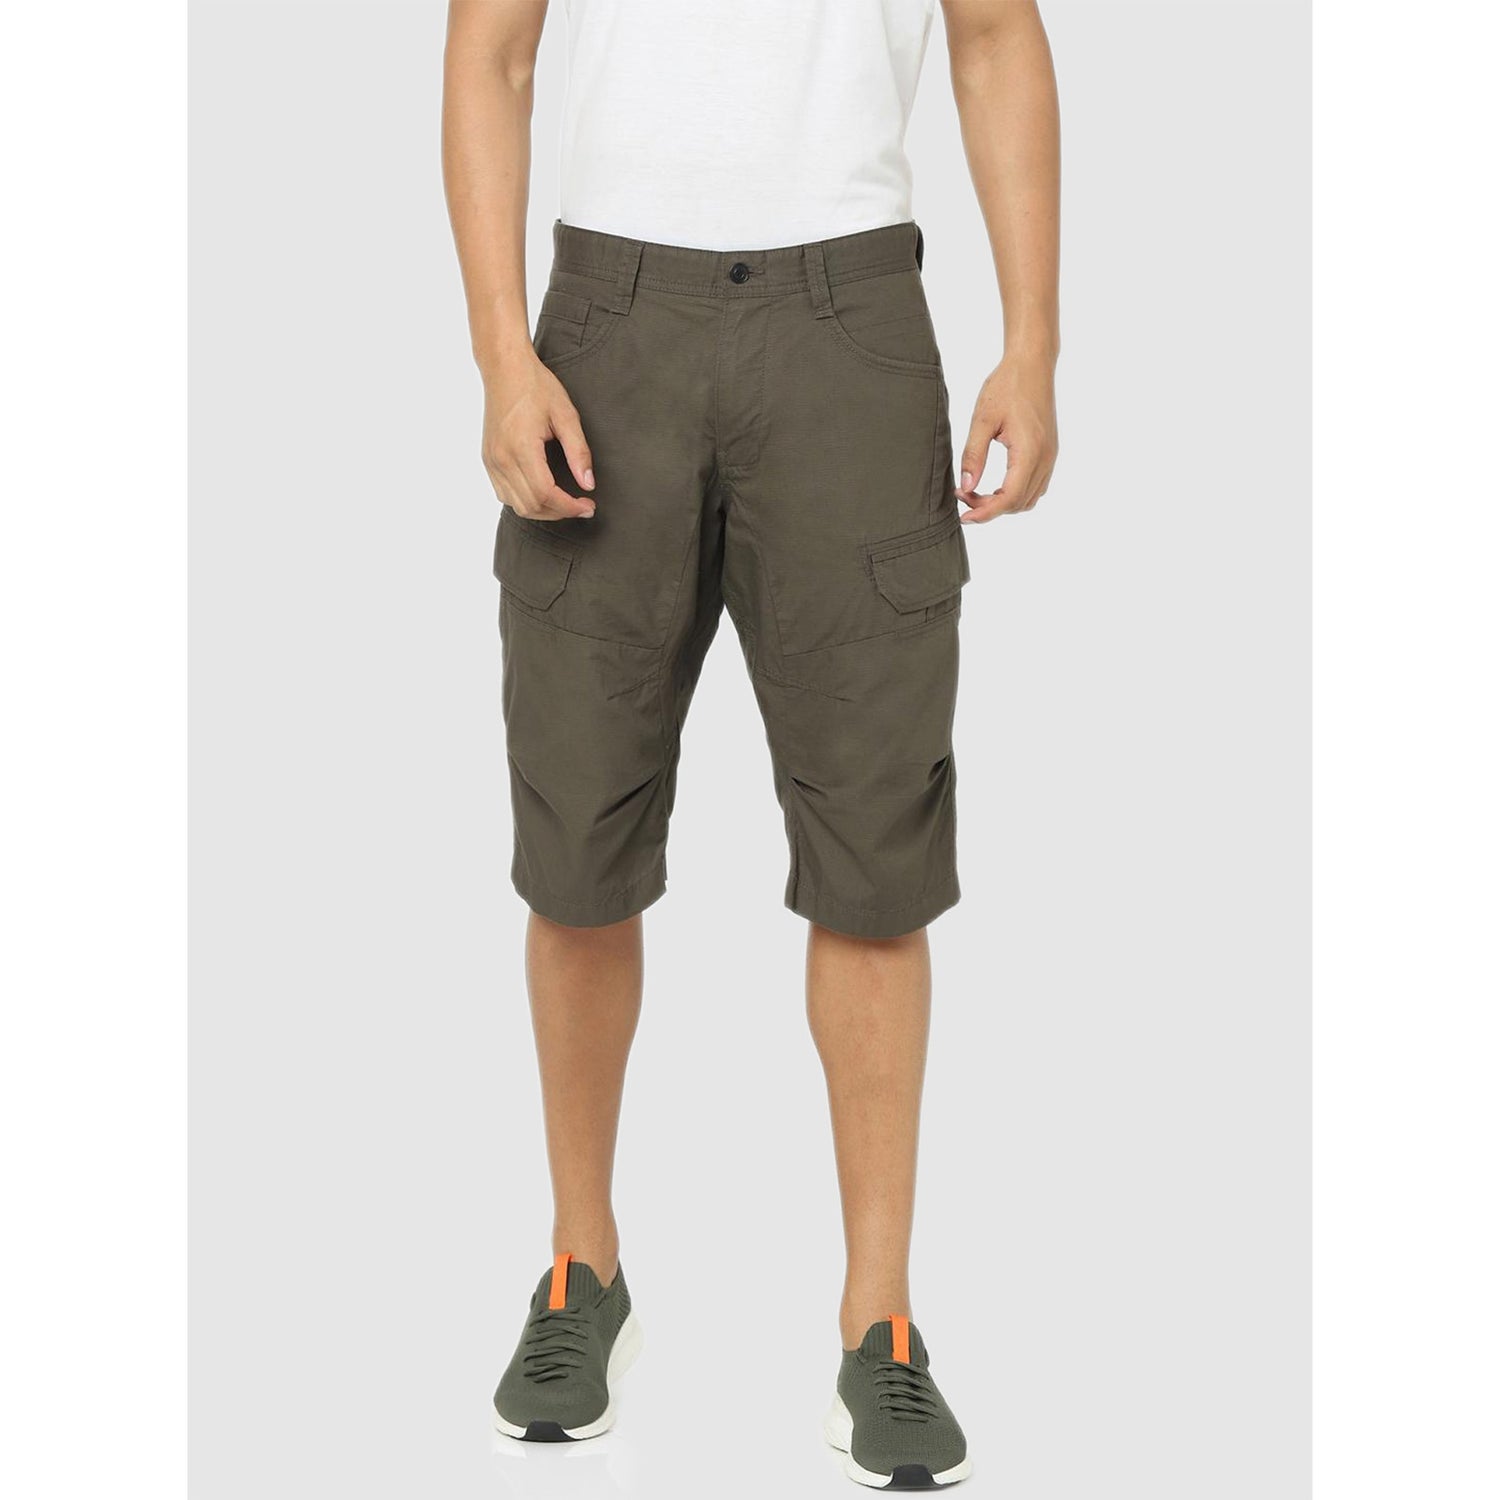 Olive Solid Regular Fit Shorts (Various Sizes)